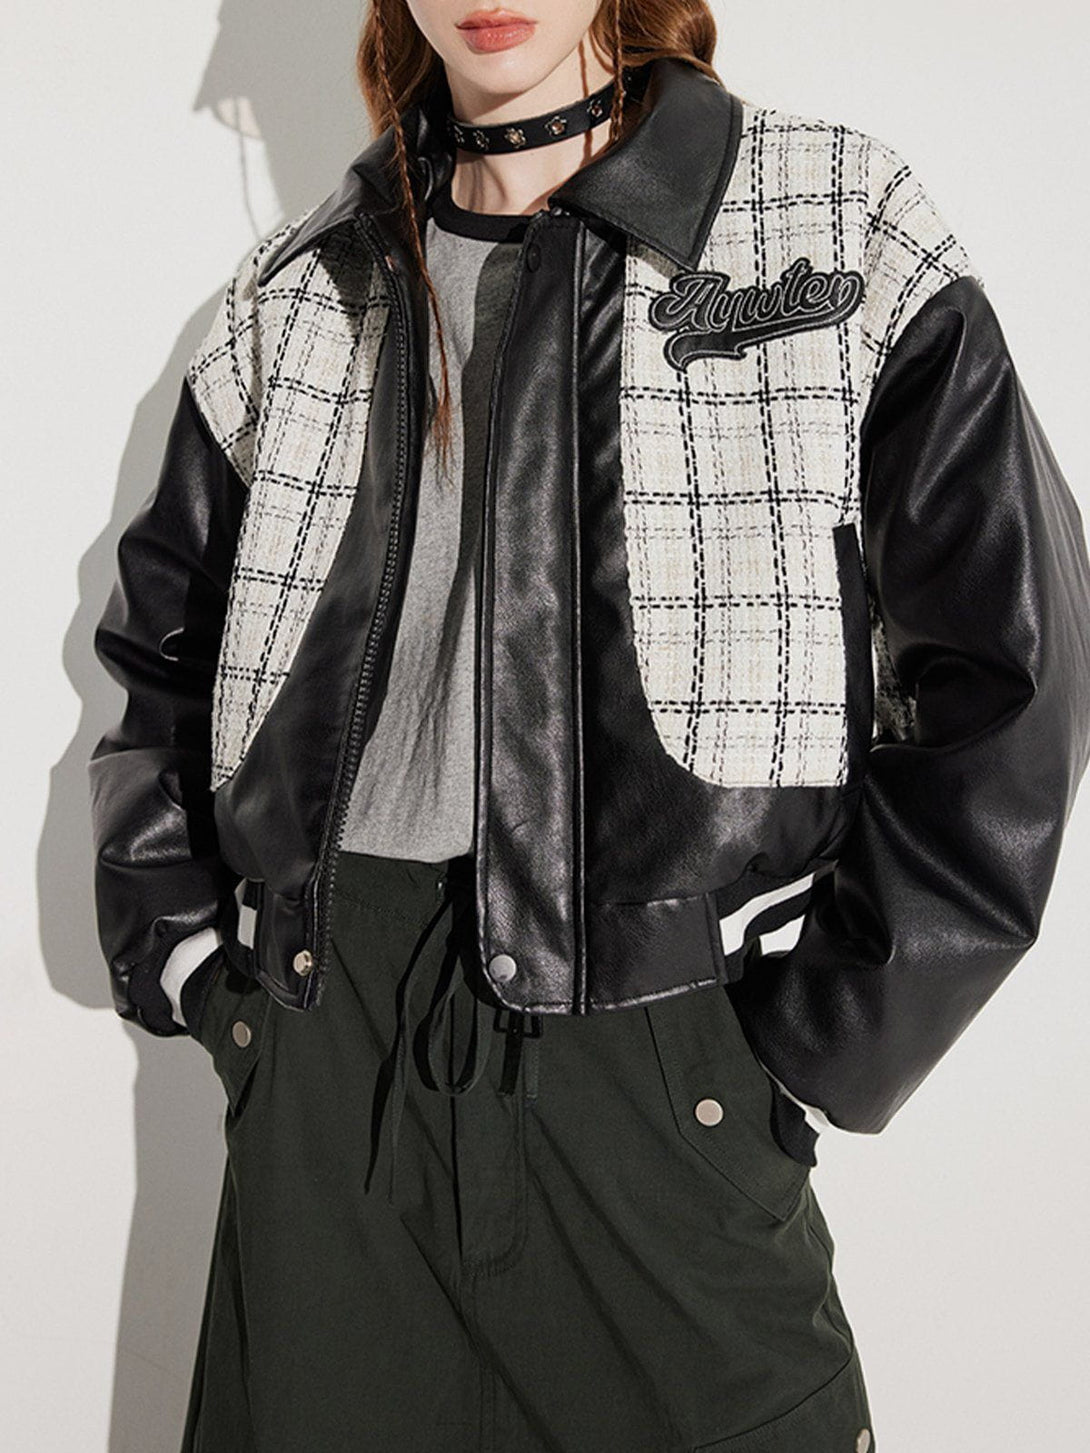 Levefly - Check Patchwork PU Embroidery Winter Coat - Streetwear Fashion - levefly.com